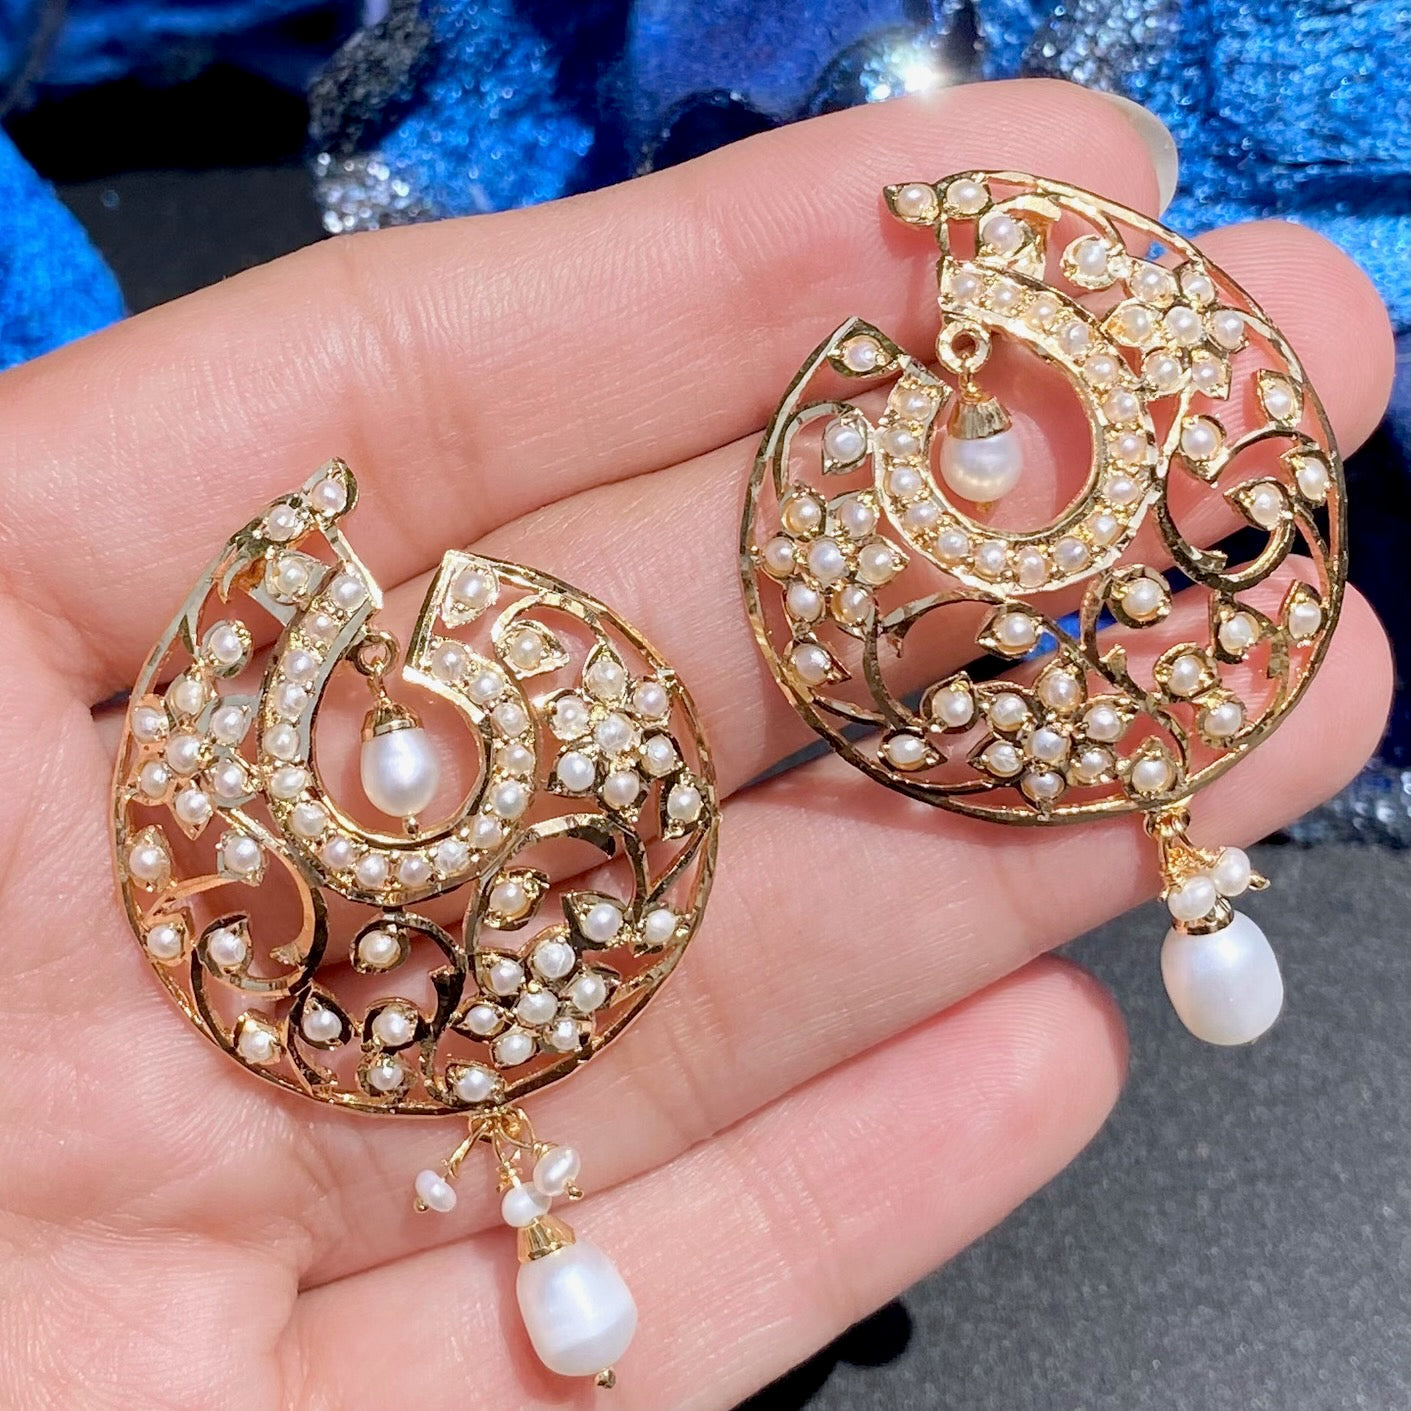 Contemporary pearl earrings